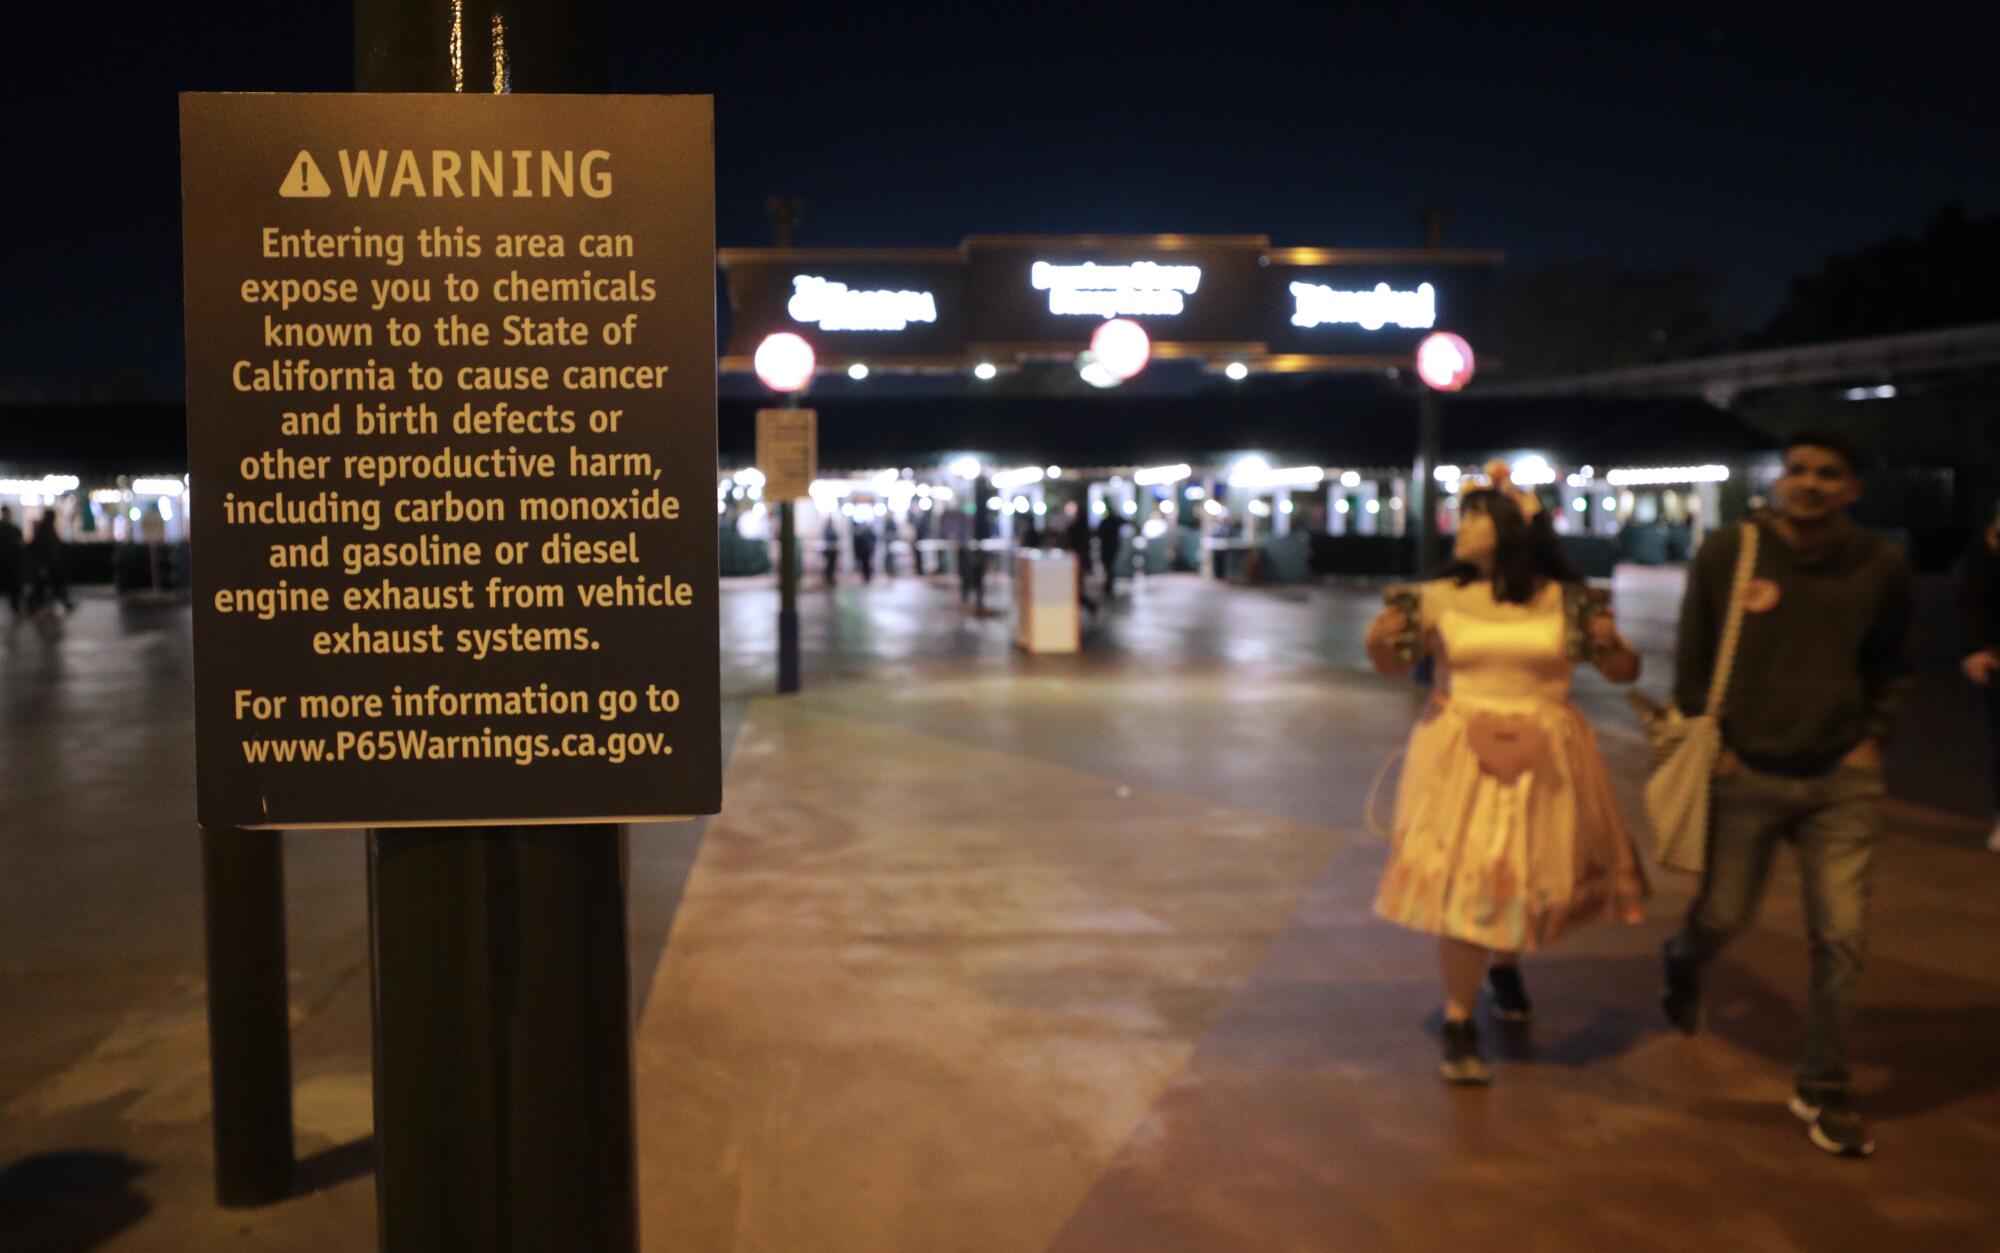 A Proposition 65 sign at Disneyland's entrance warns visitors of the presence of dangerous chemicals.